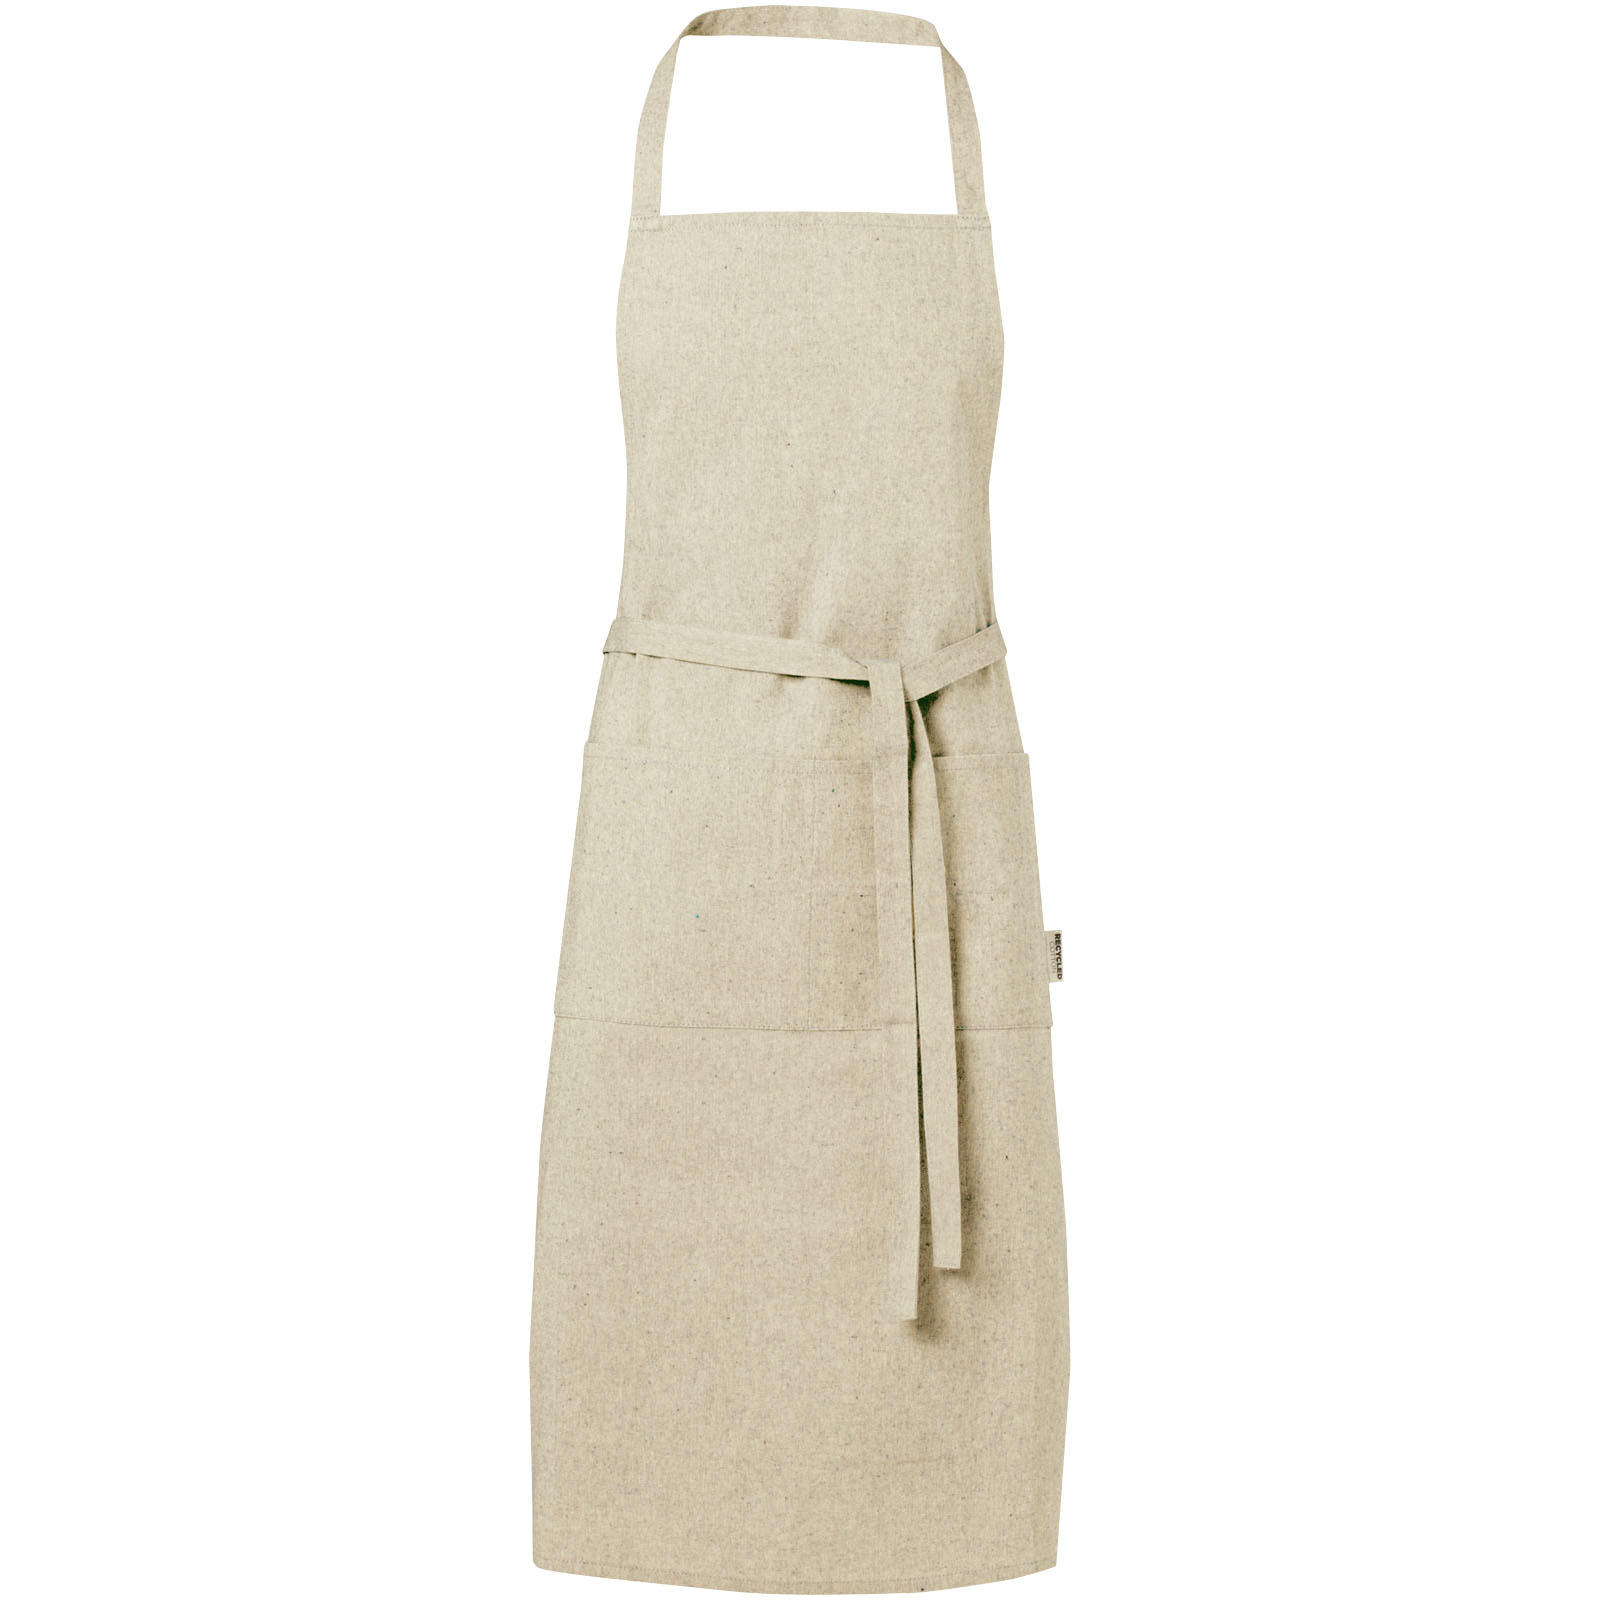 Advertising Aprons - Pheebs 200 g/m² recycled cotton apron